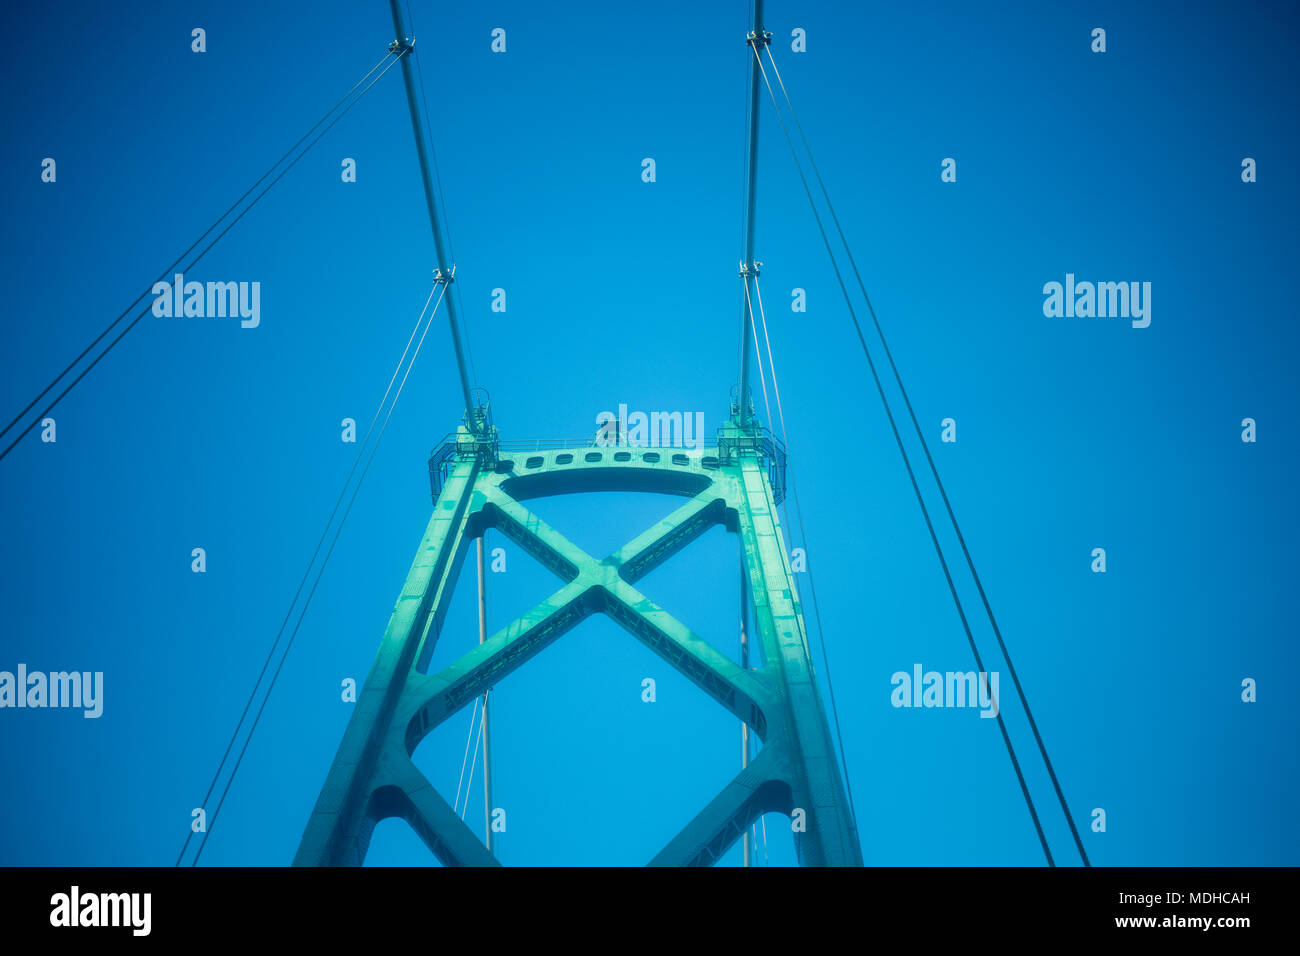 Architectural detail of the Lions Gate Bridge against a blue sky; Vancouver, British Columbia, Canada Stock Photo